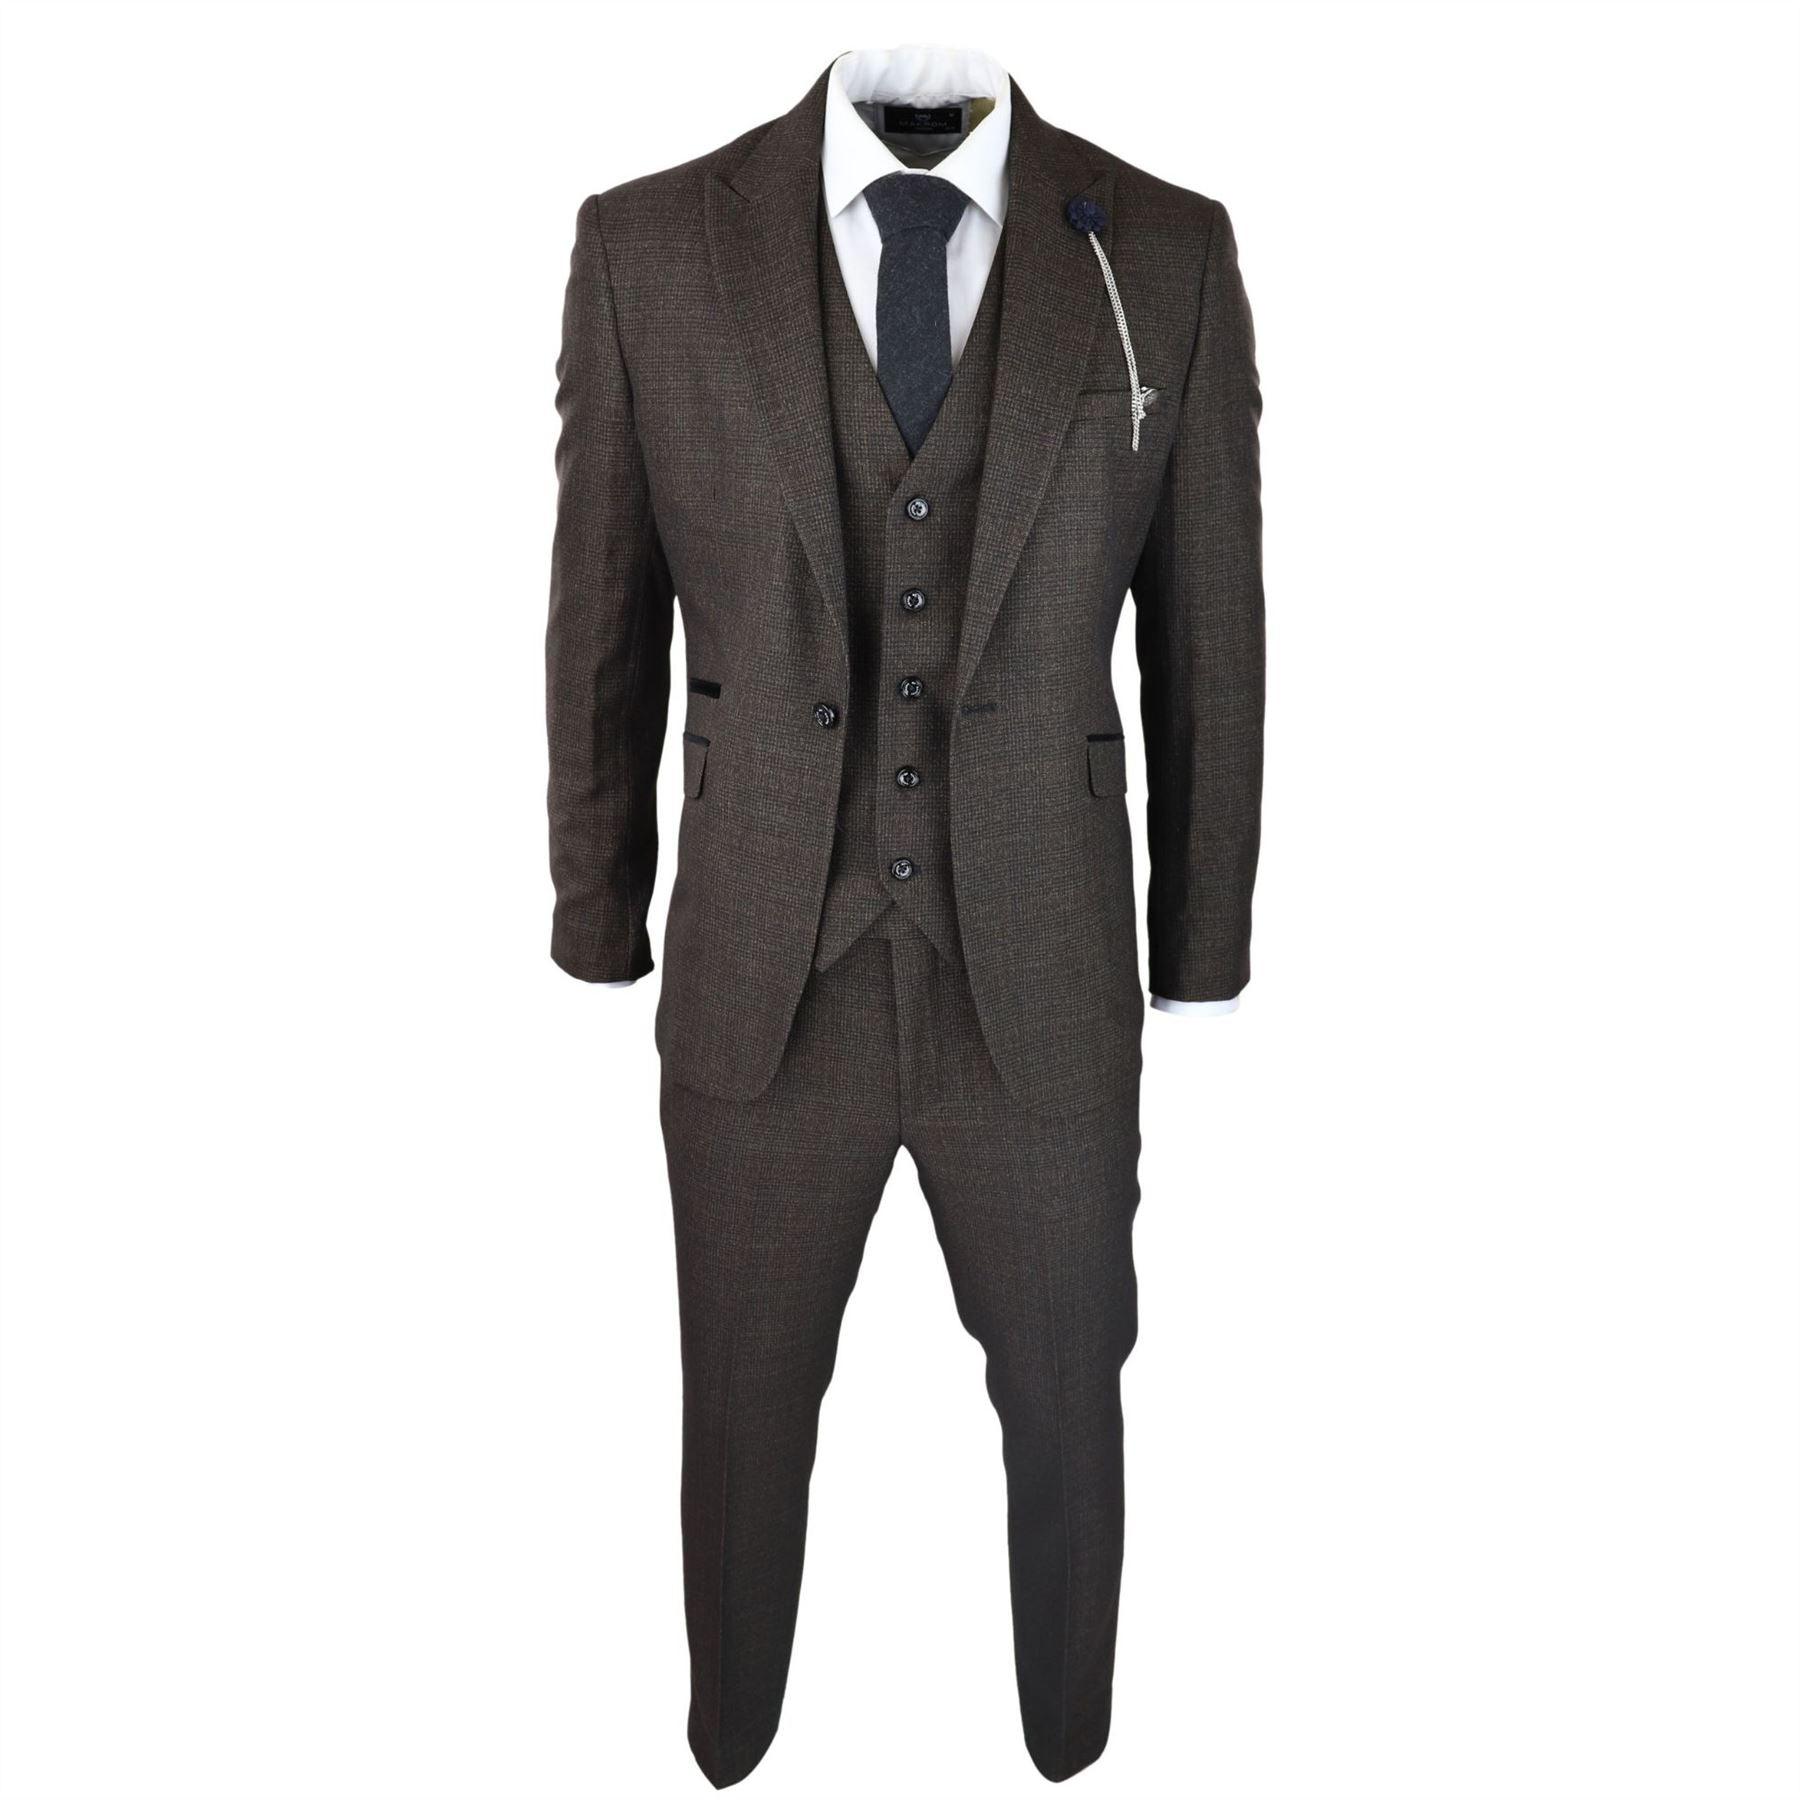 Mens 3 Piece Check Suit Tweed Black Brown Tailored Fit Wedding Peaky Classic - Knighthood Store